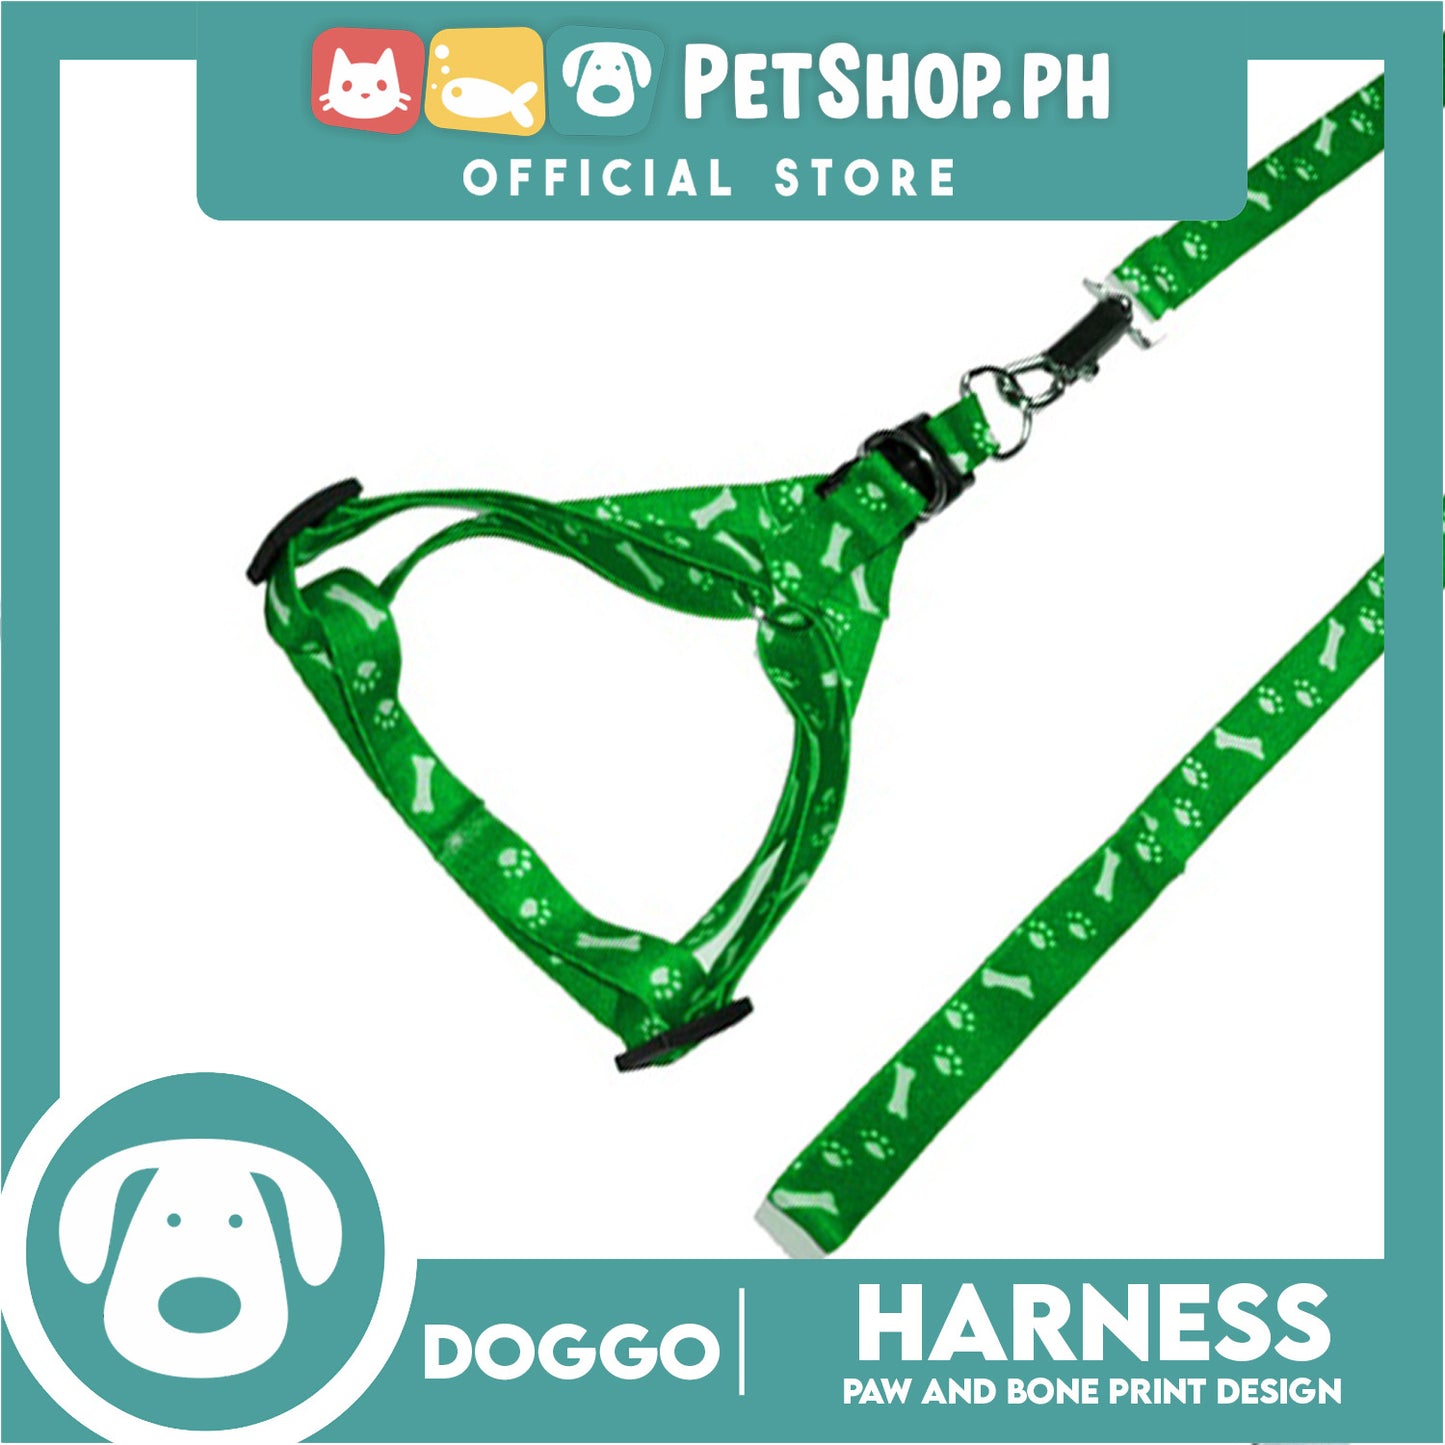 Doggo Harness Leash With Design Medium Size (Green) Harness Leash for Your Puppy